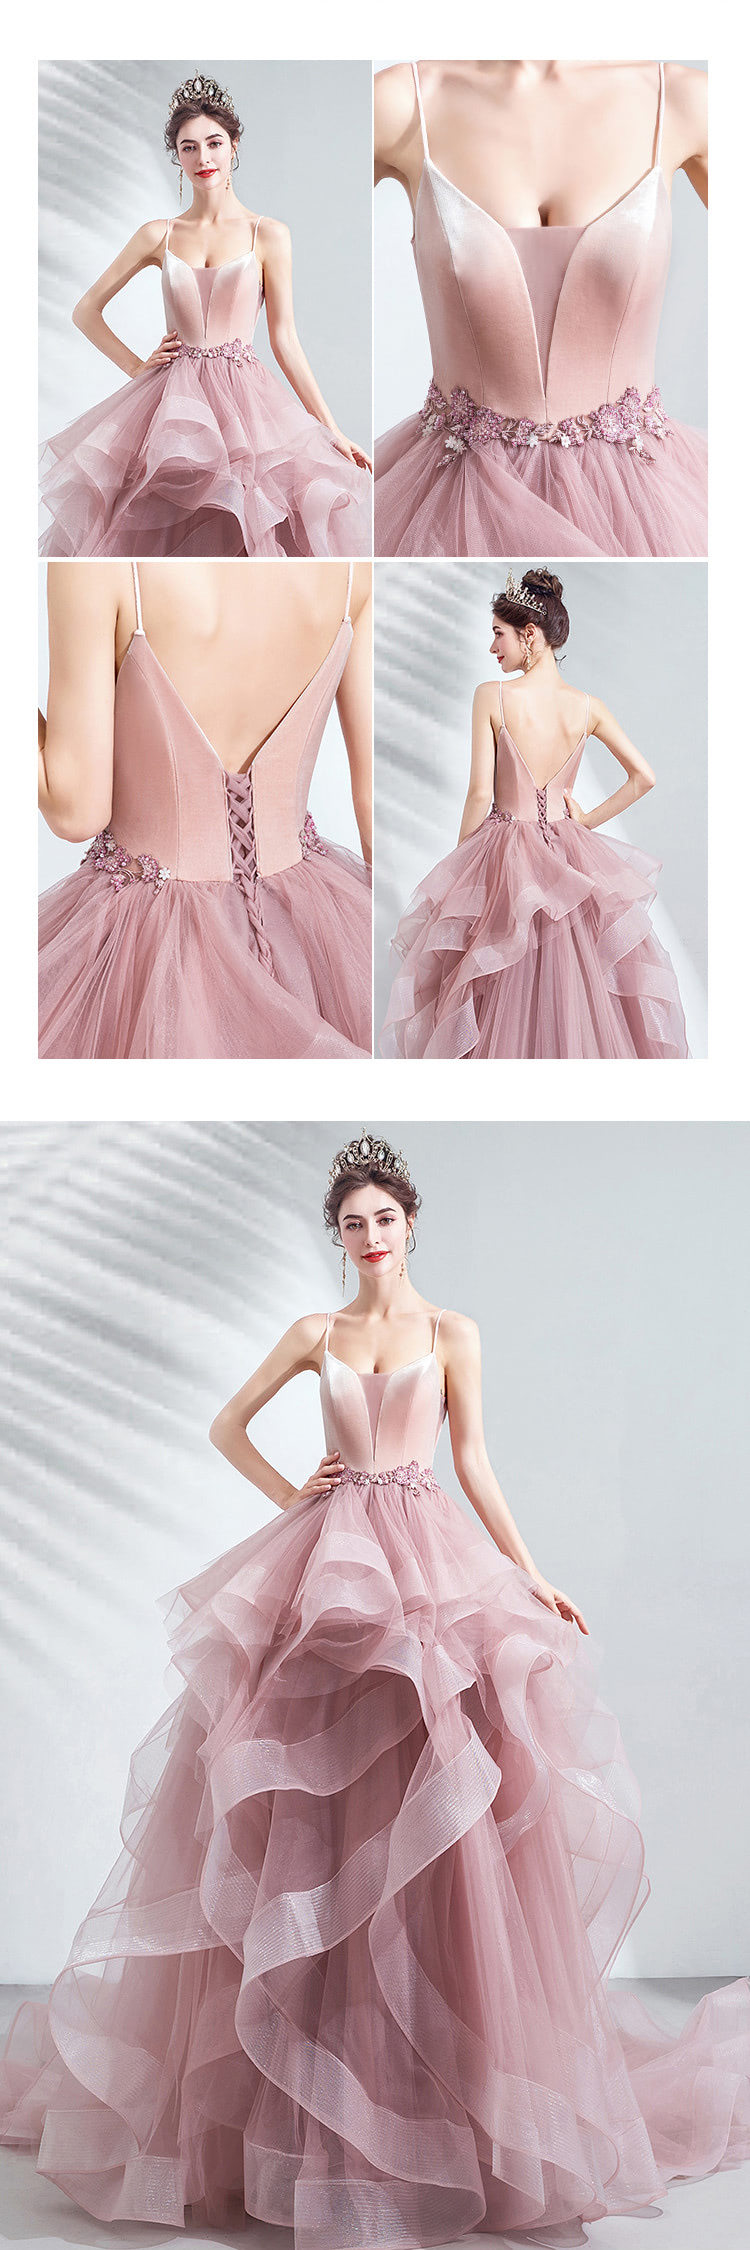 Pink-Layered-Tulle-Banquet-Prom-Party-Evening-Pompon-Skirt-Dress13